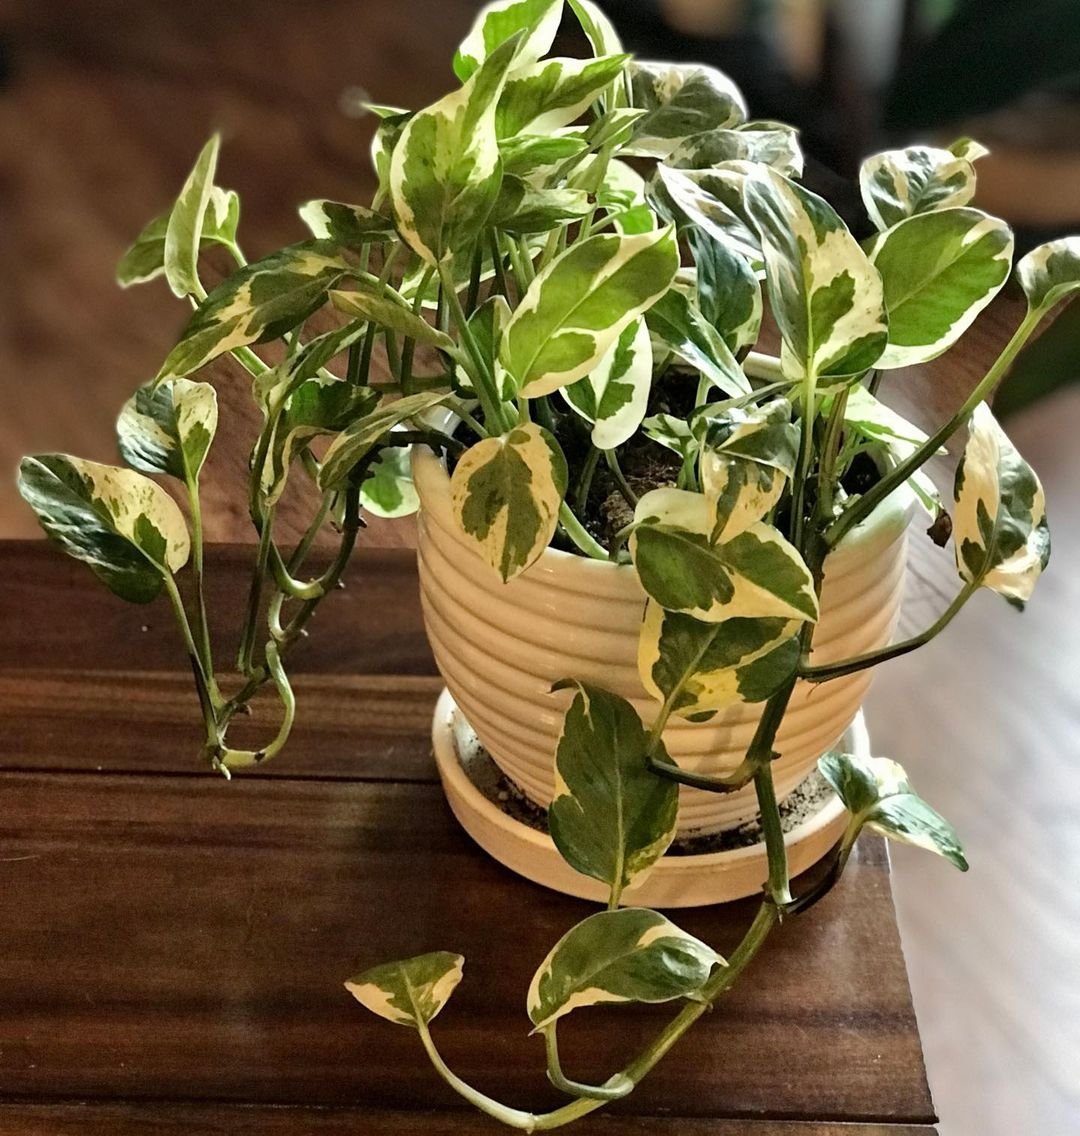 Pearls and Jade Pothos: A variegated houseplant with heart-shaped leaves, featuring green and white patterns.

